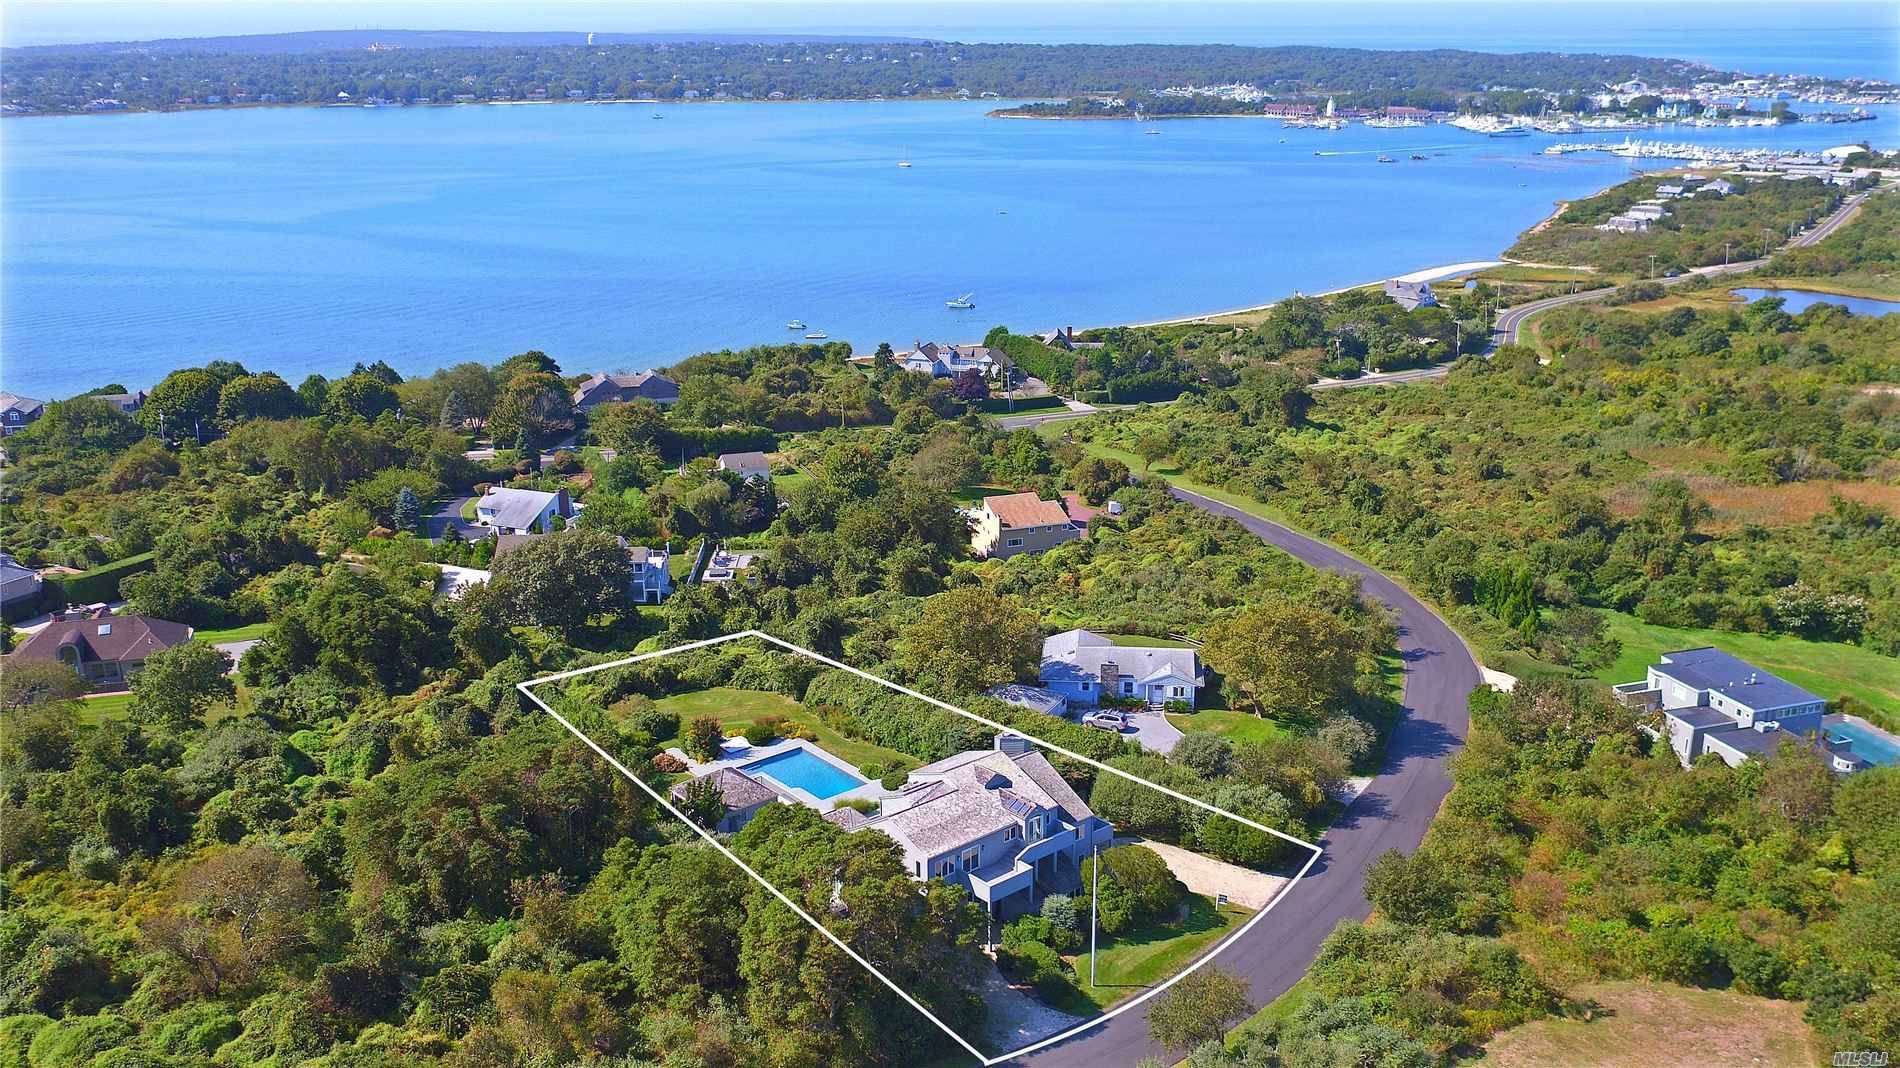 Sunrise and sunset sweeping views of Ocean, Lake Montauk and Bay from elevated East Lake Drive Contemporary home.